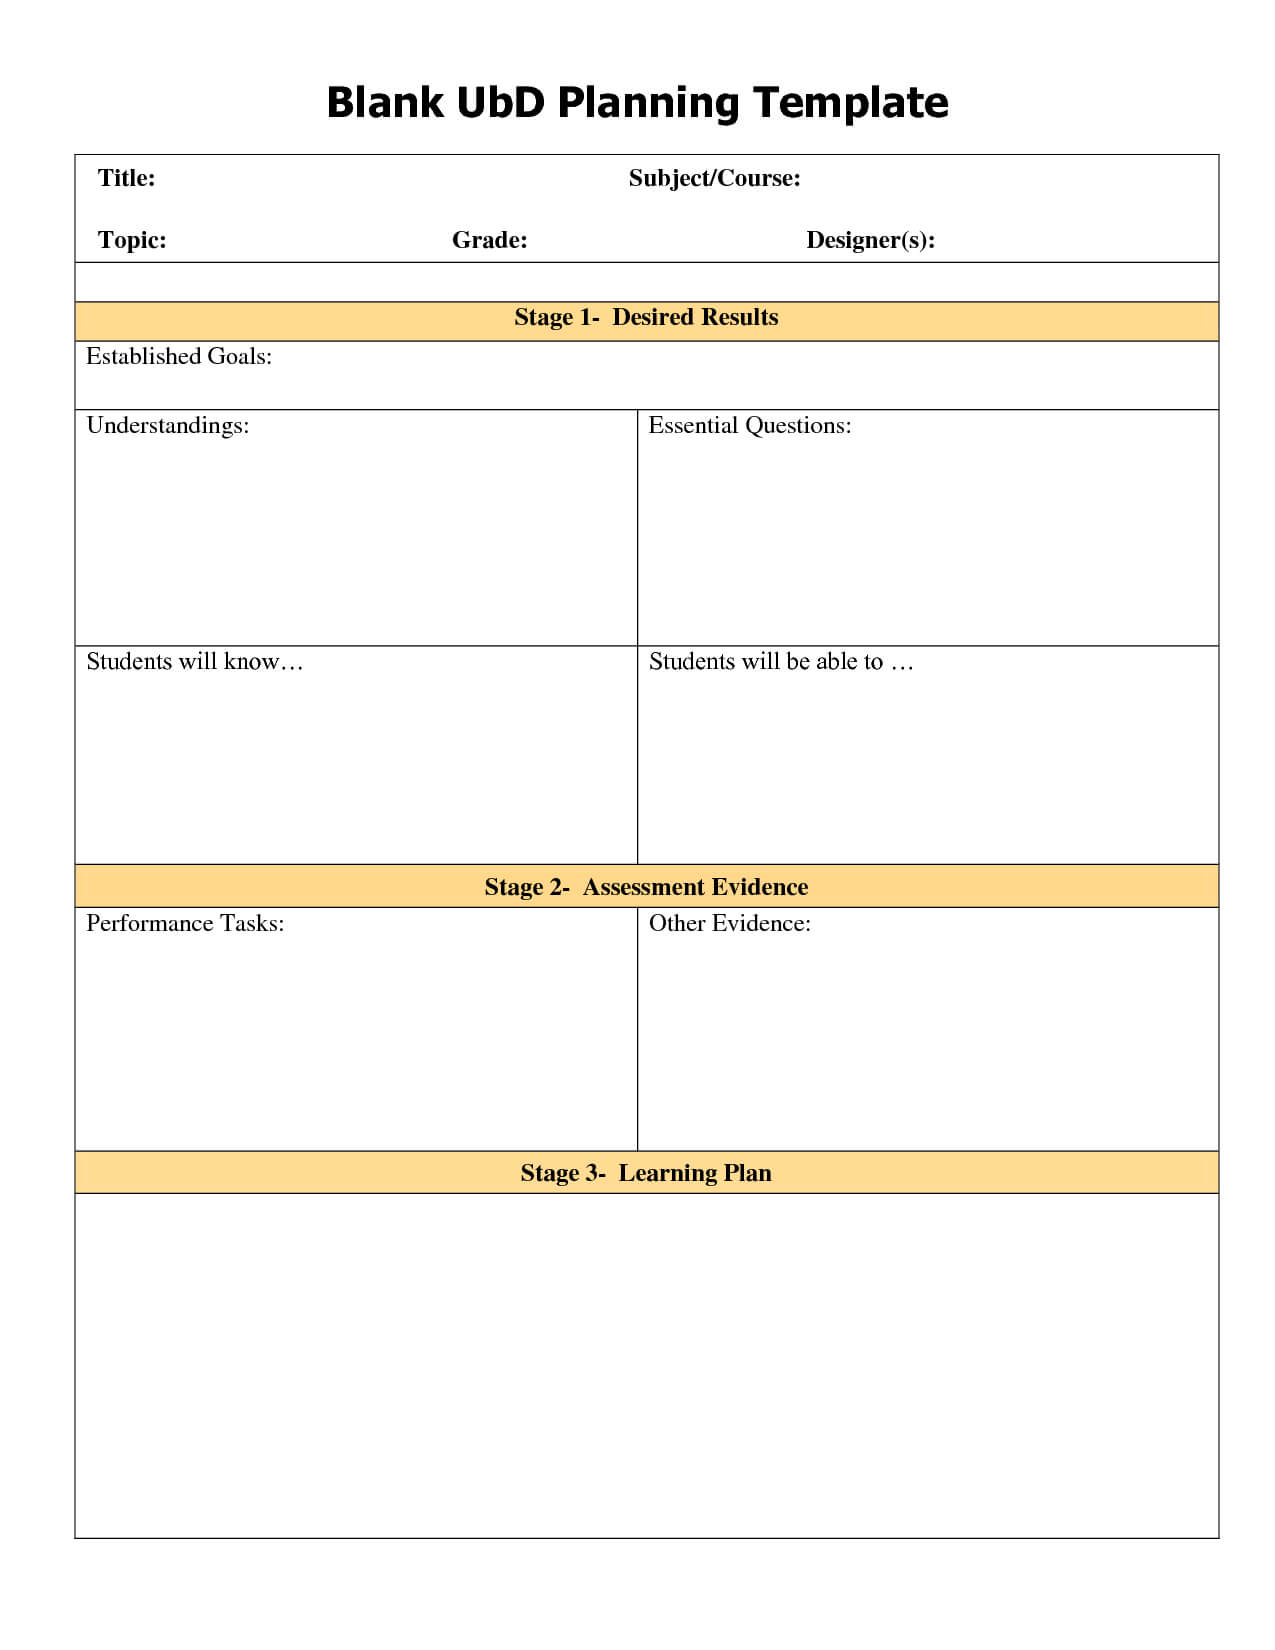 Blank Ubd Template | Blank Ubd Planning Template For Blank Unit Lesson Plan Template